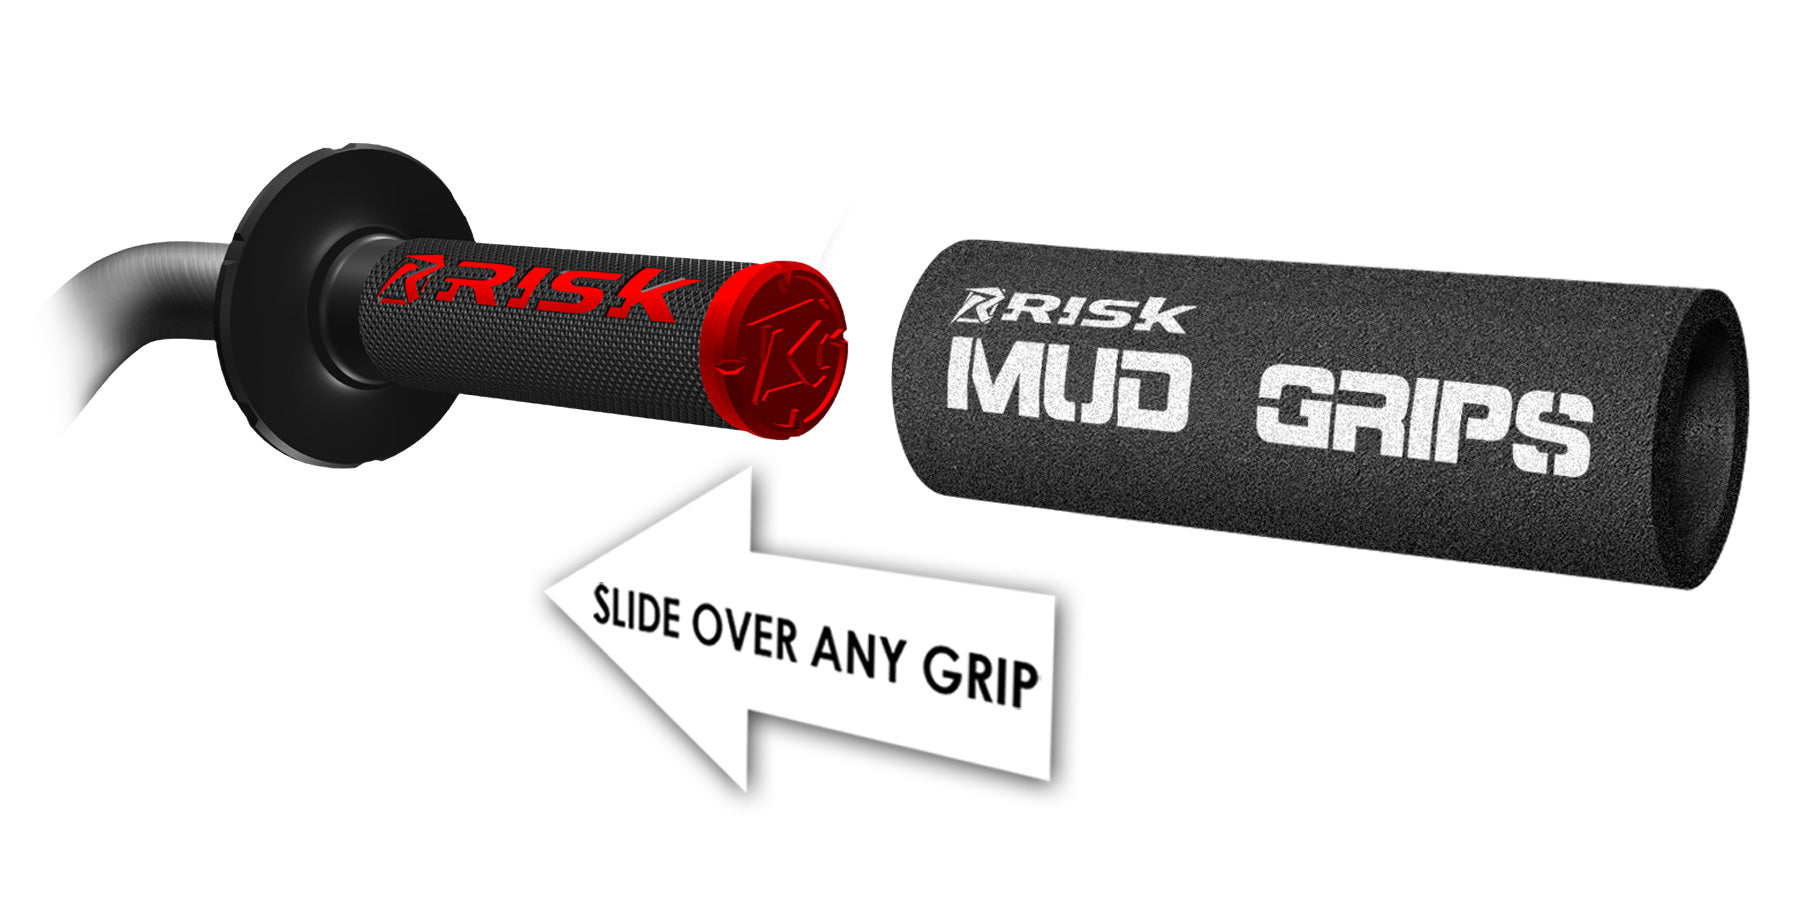 Mud Grips - Get a grip even in the muddiest/slippery conditions - Slides over Motocross/ATV/Mountain Bike grips // Risk Racing Europe